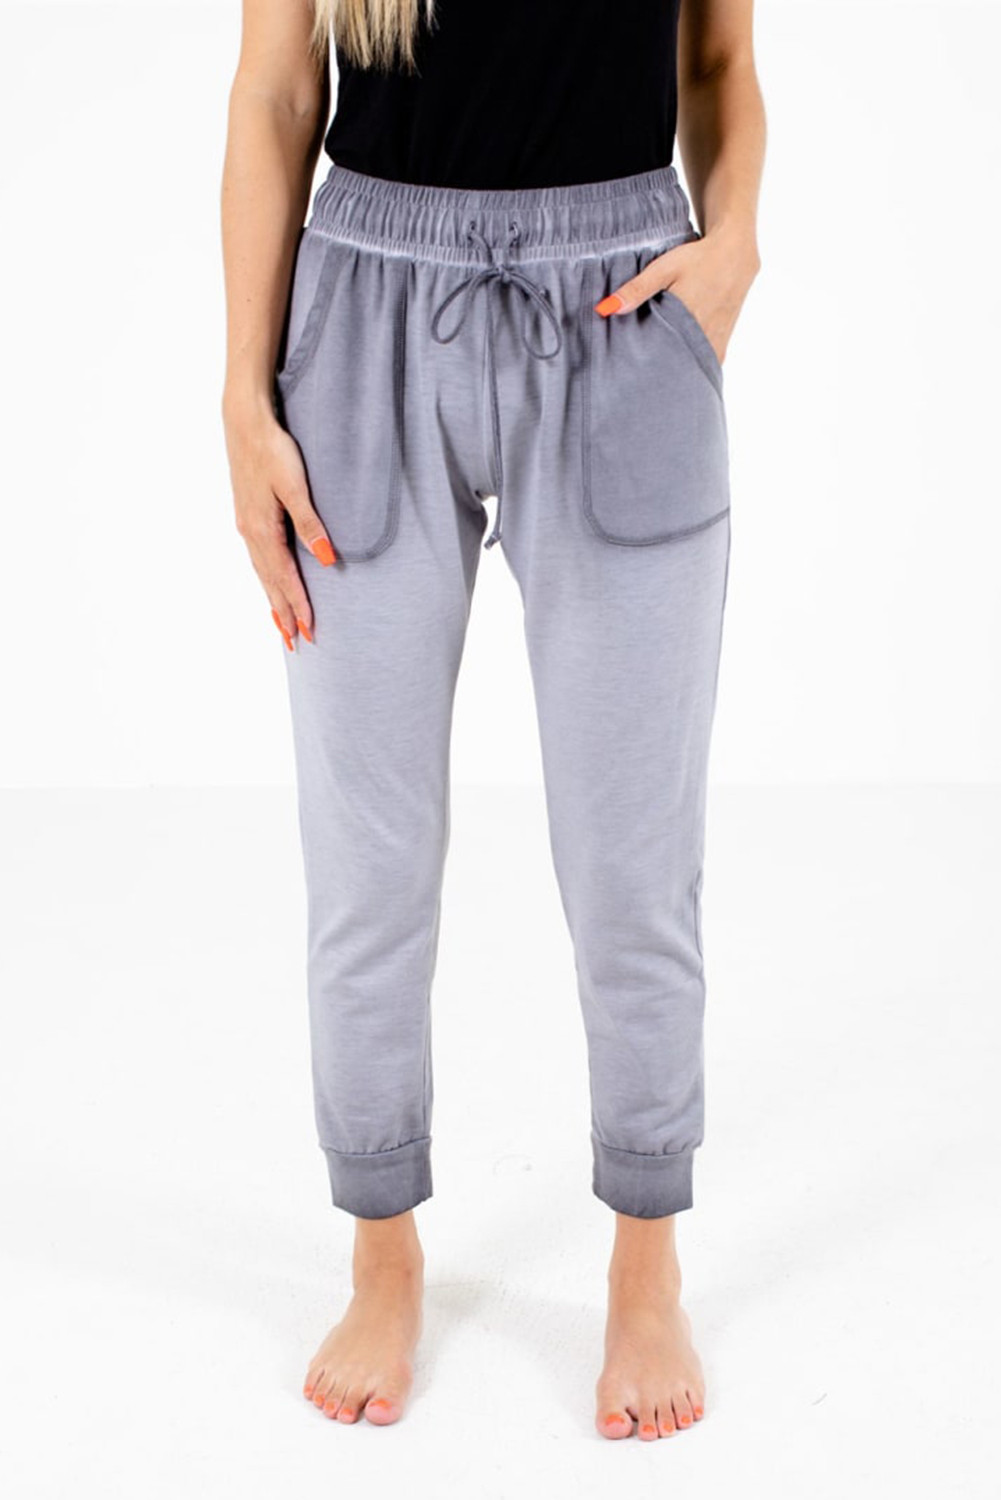 US$6.98 Gray Lazy Day Lounge Pants Wholesale Online